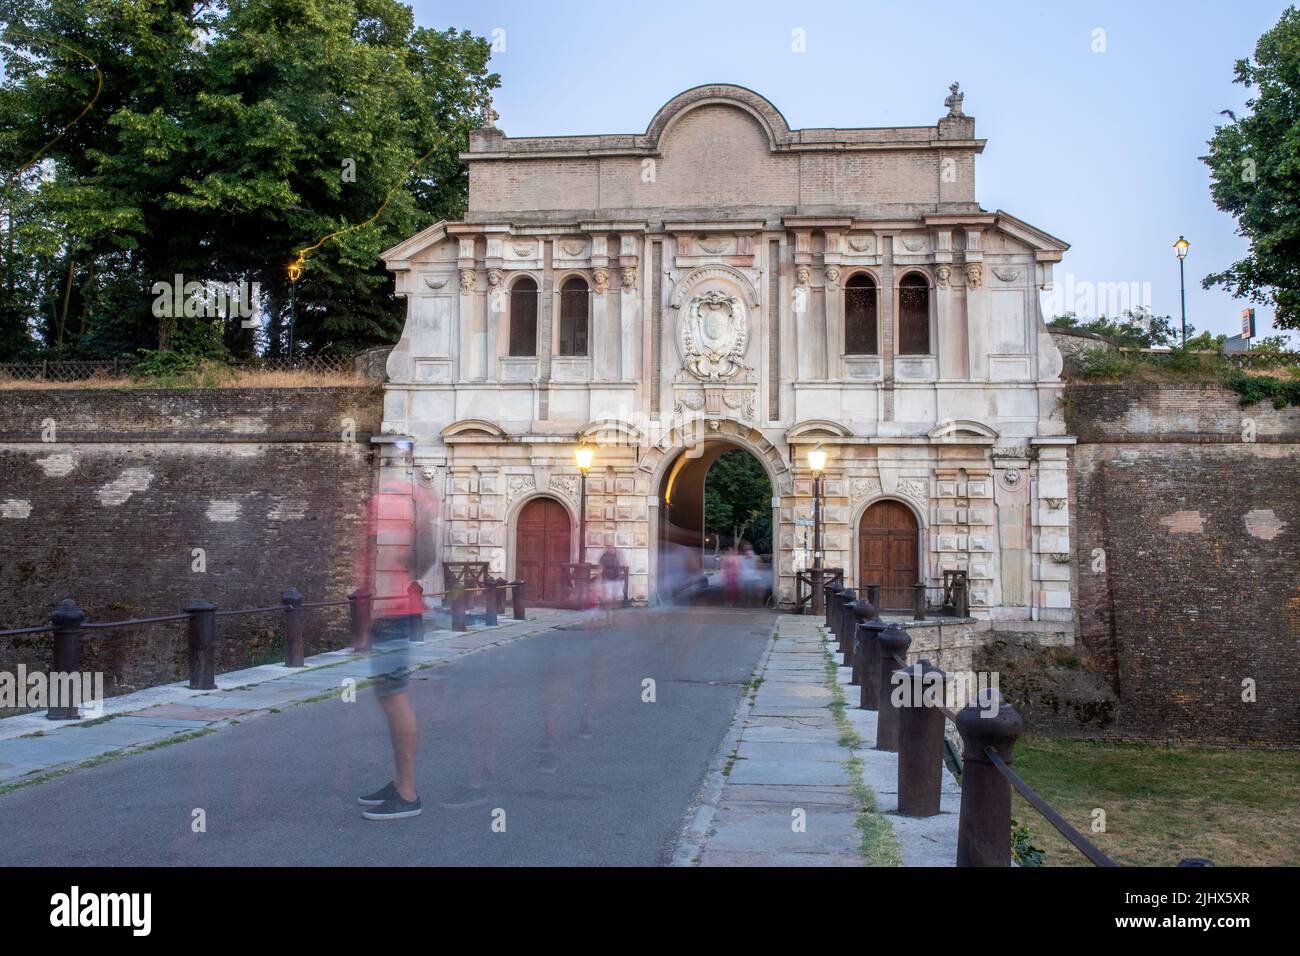 Entrance of the 'Citadel of Parma'. Ancient fortification with medieval walls today used as a park for physical activities. Stock Photo